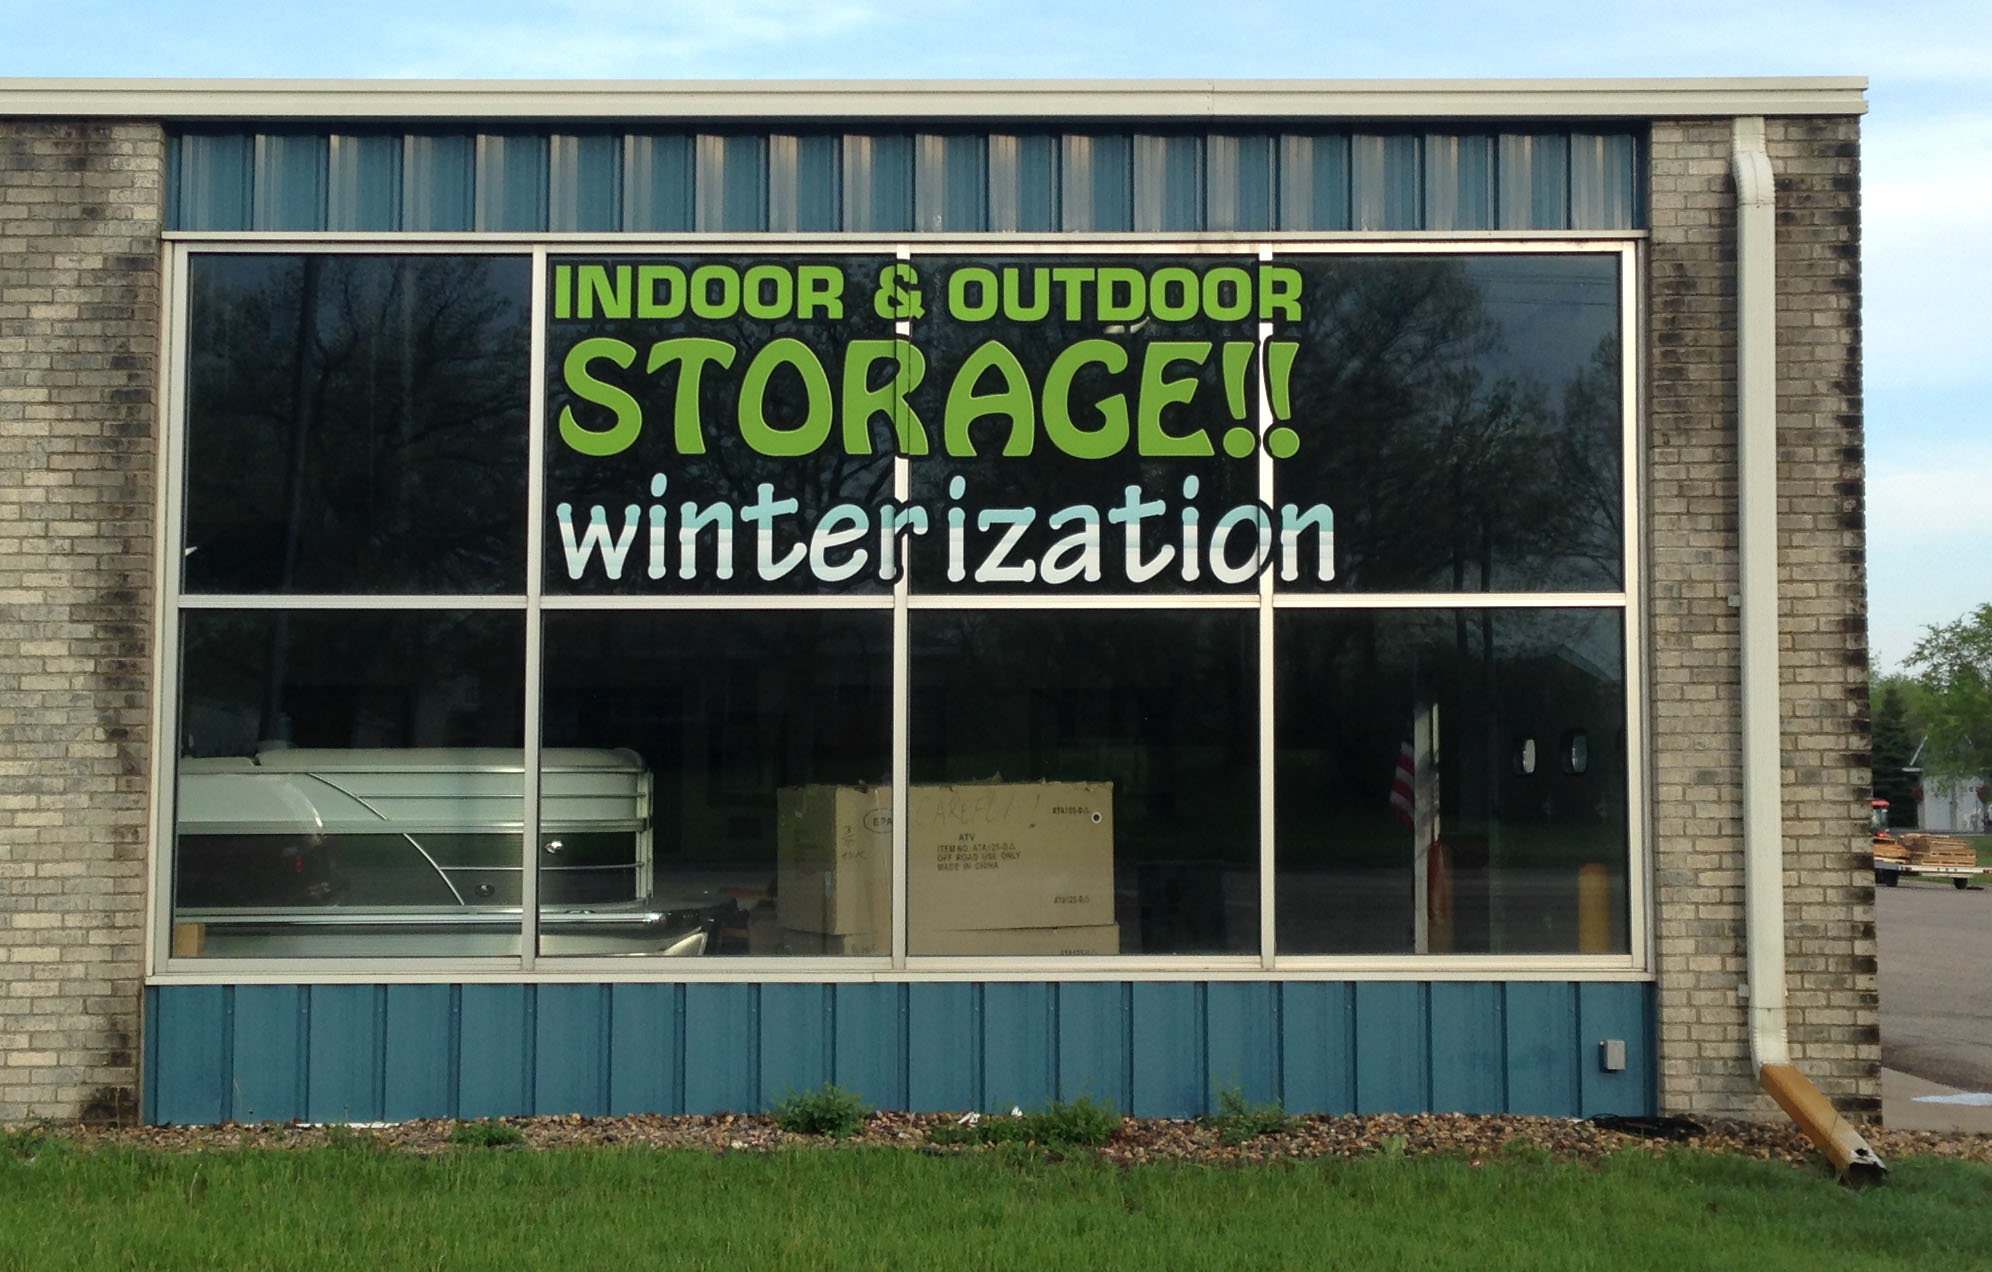 Custom Business Window Lettering from Signmax